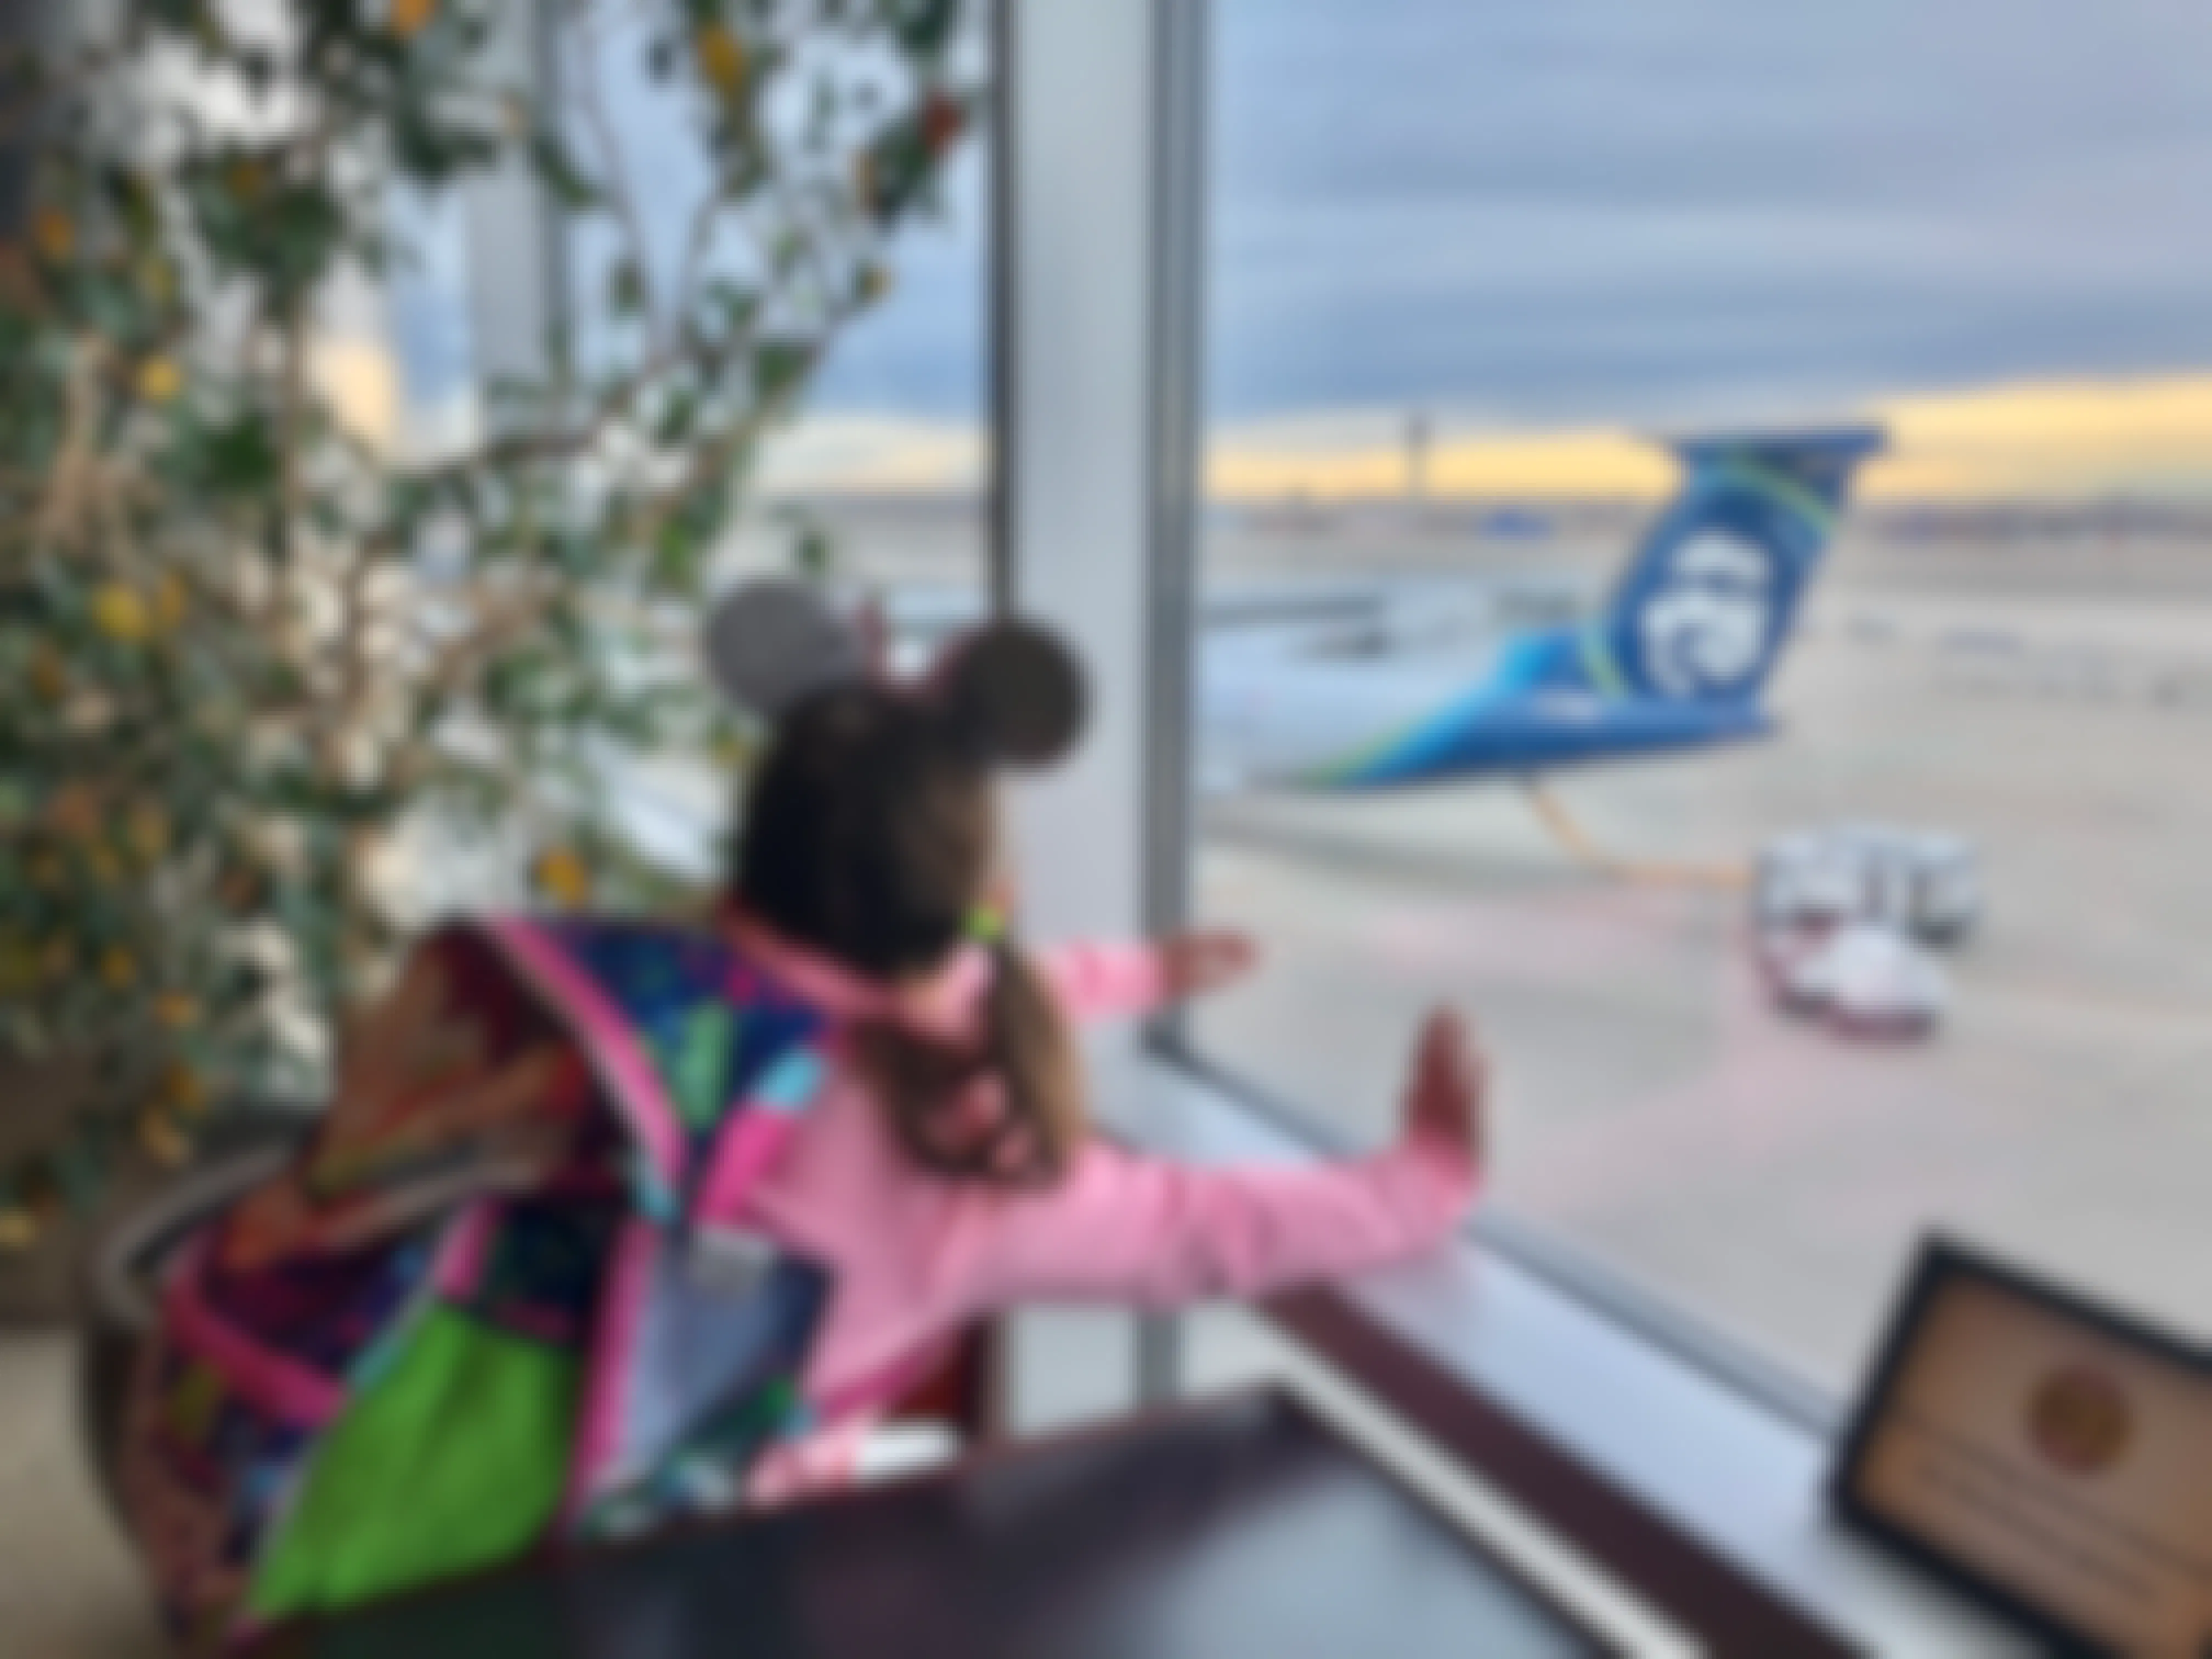 A little girl with Minnie Mouse ears looks out the window at the airport at Alaskan airlines plane.